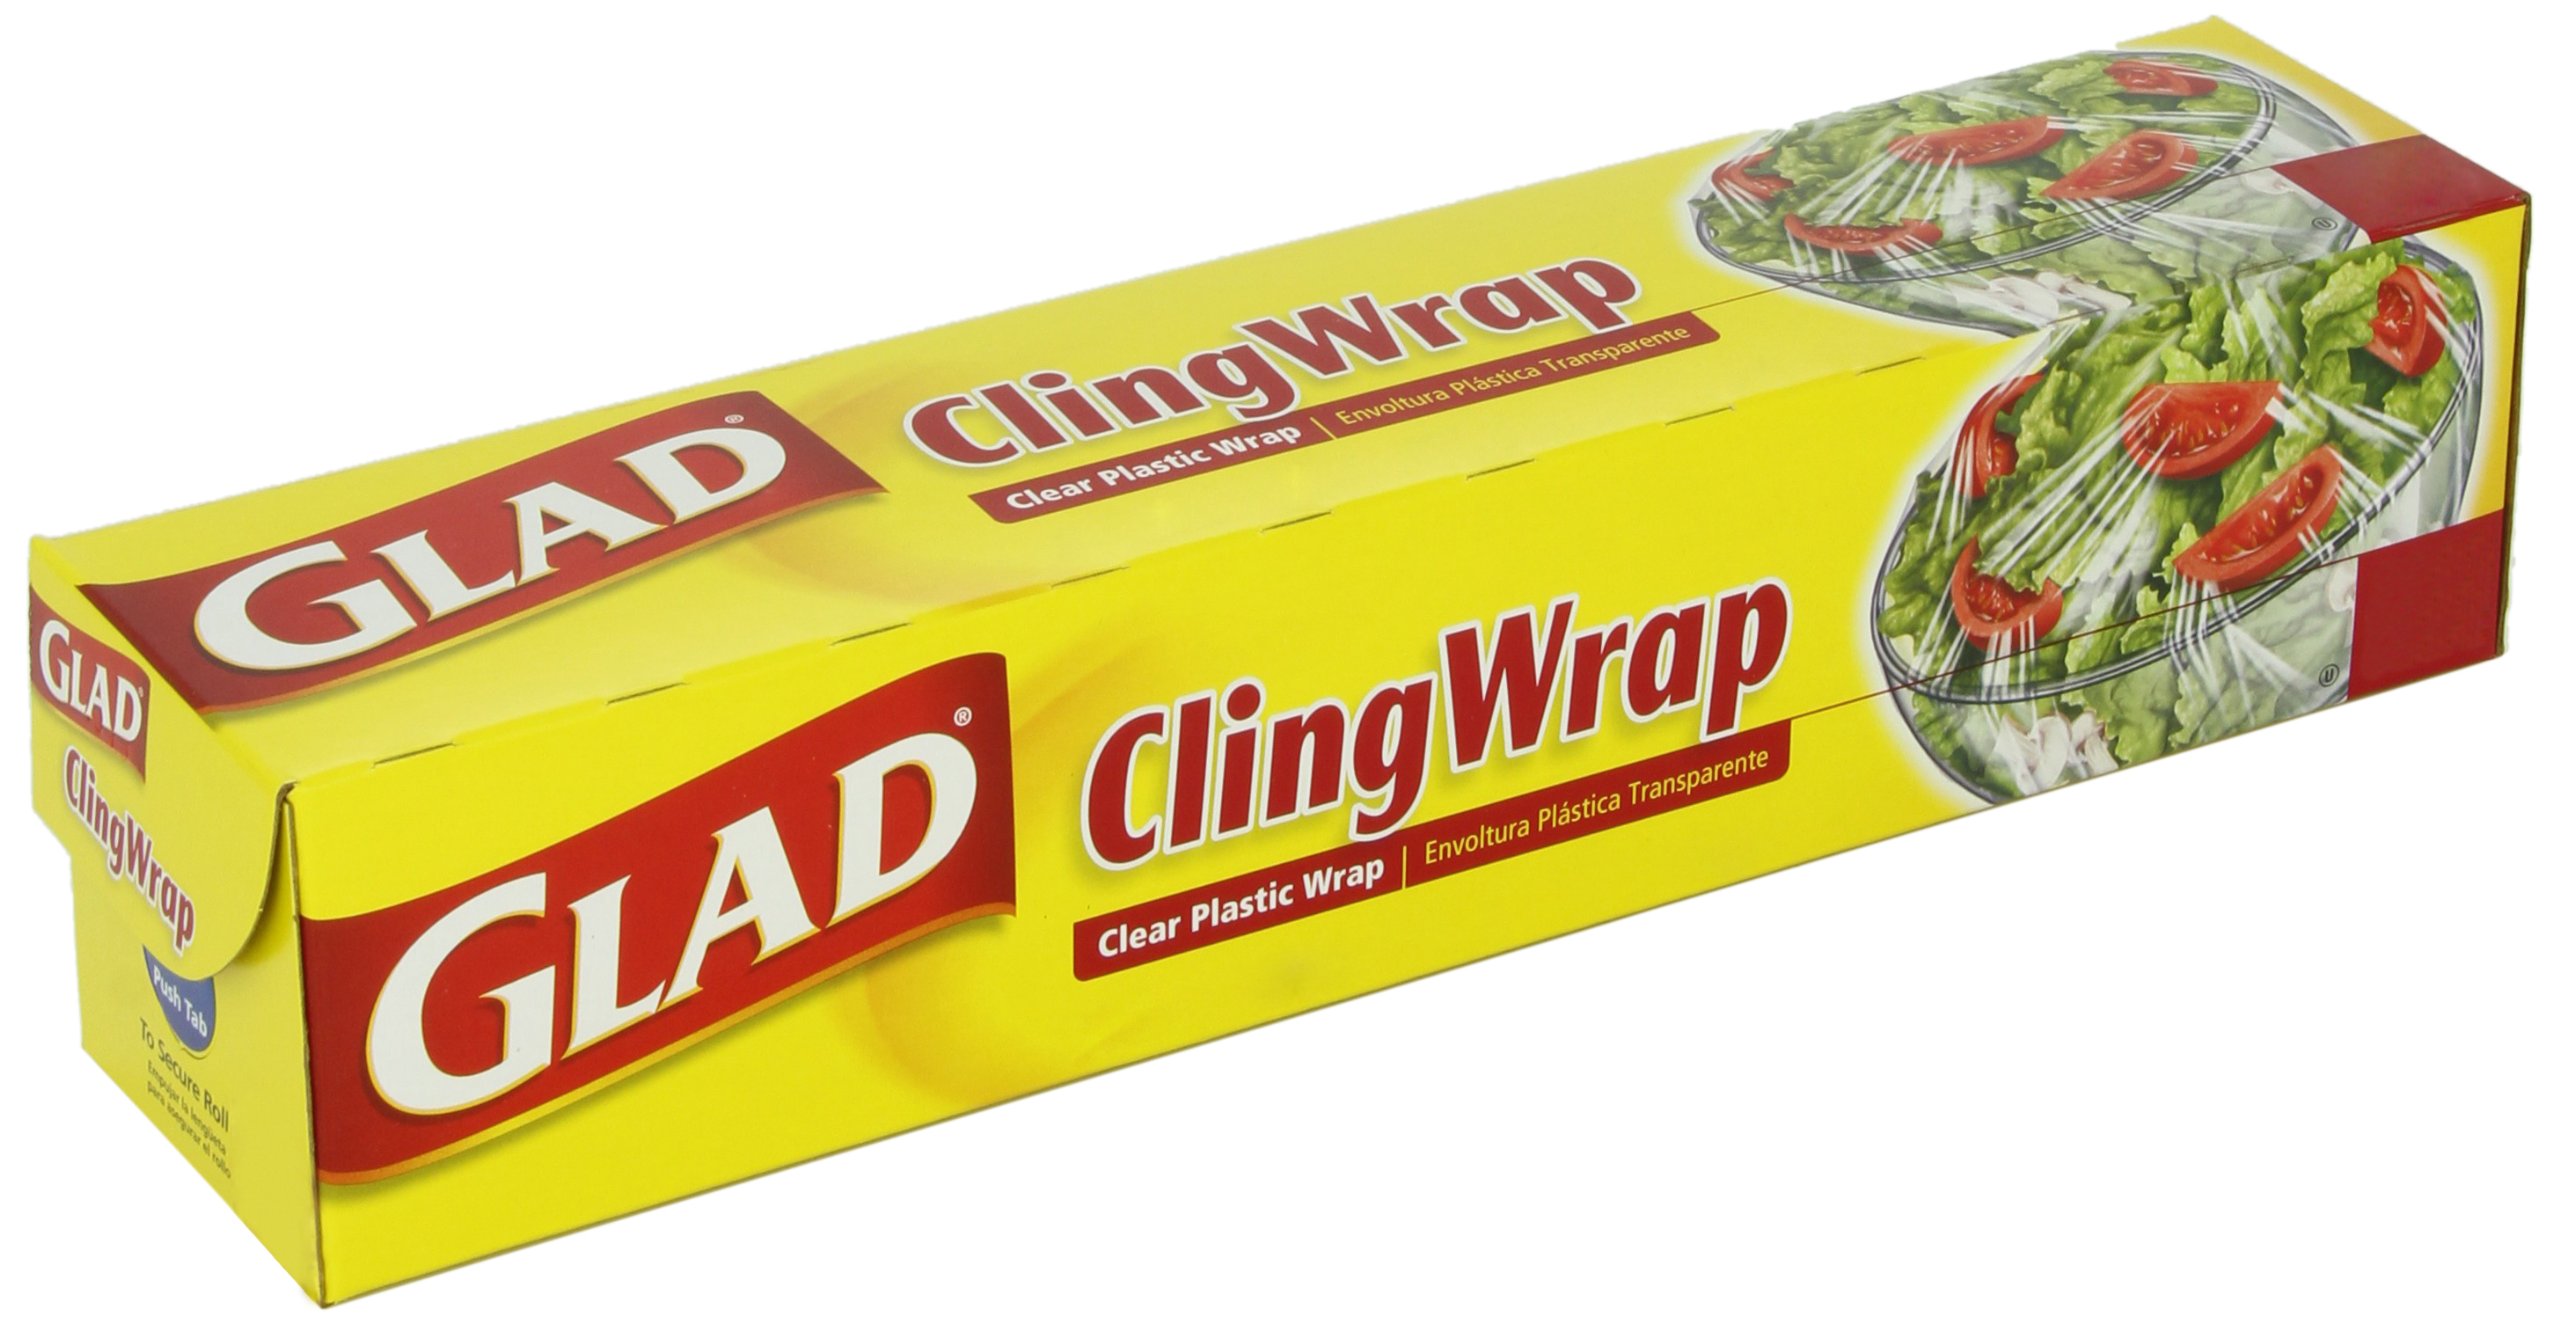 Glad Cling Wrap Only $1.49 at Walgreens